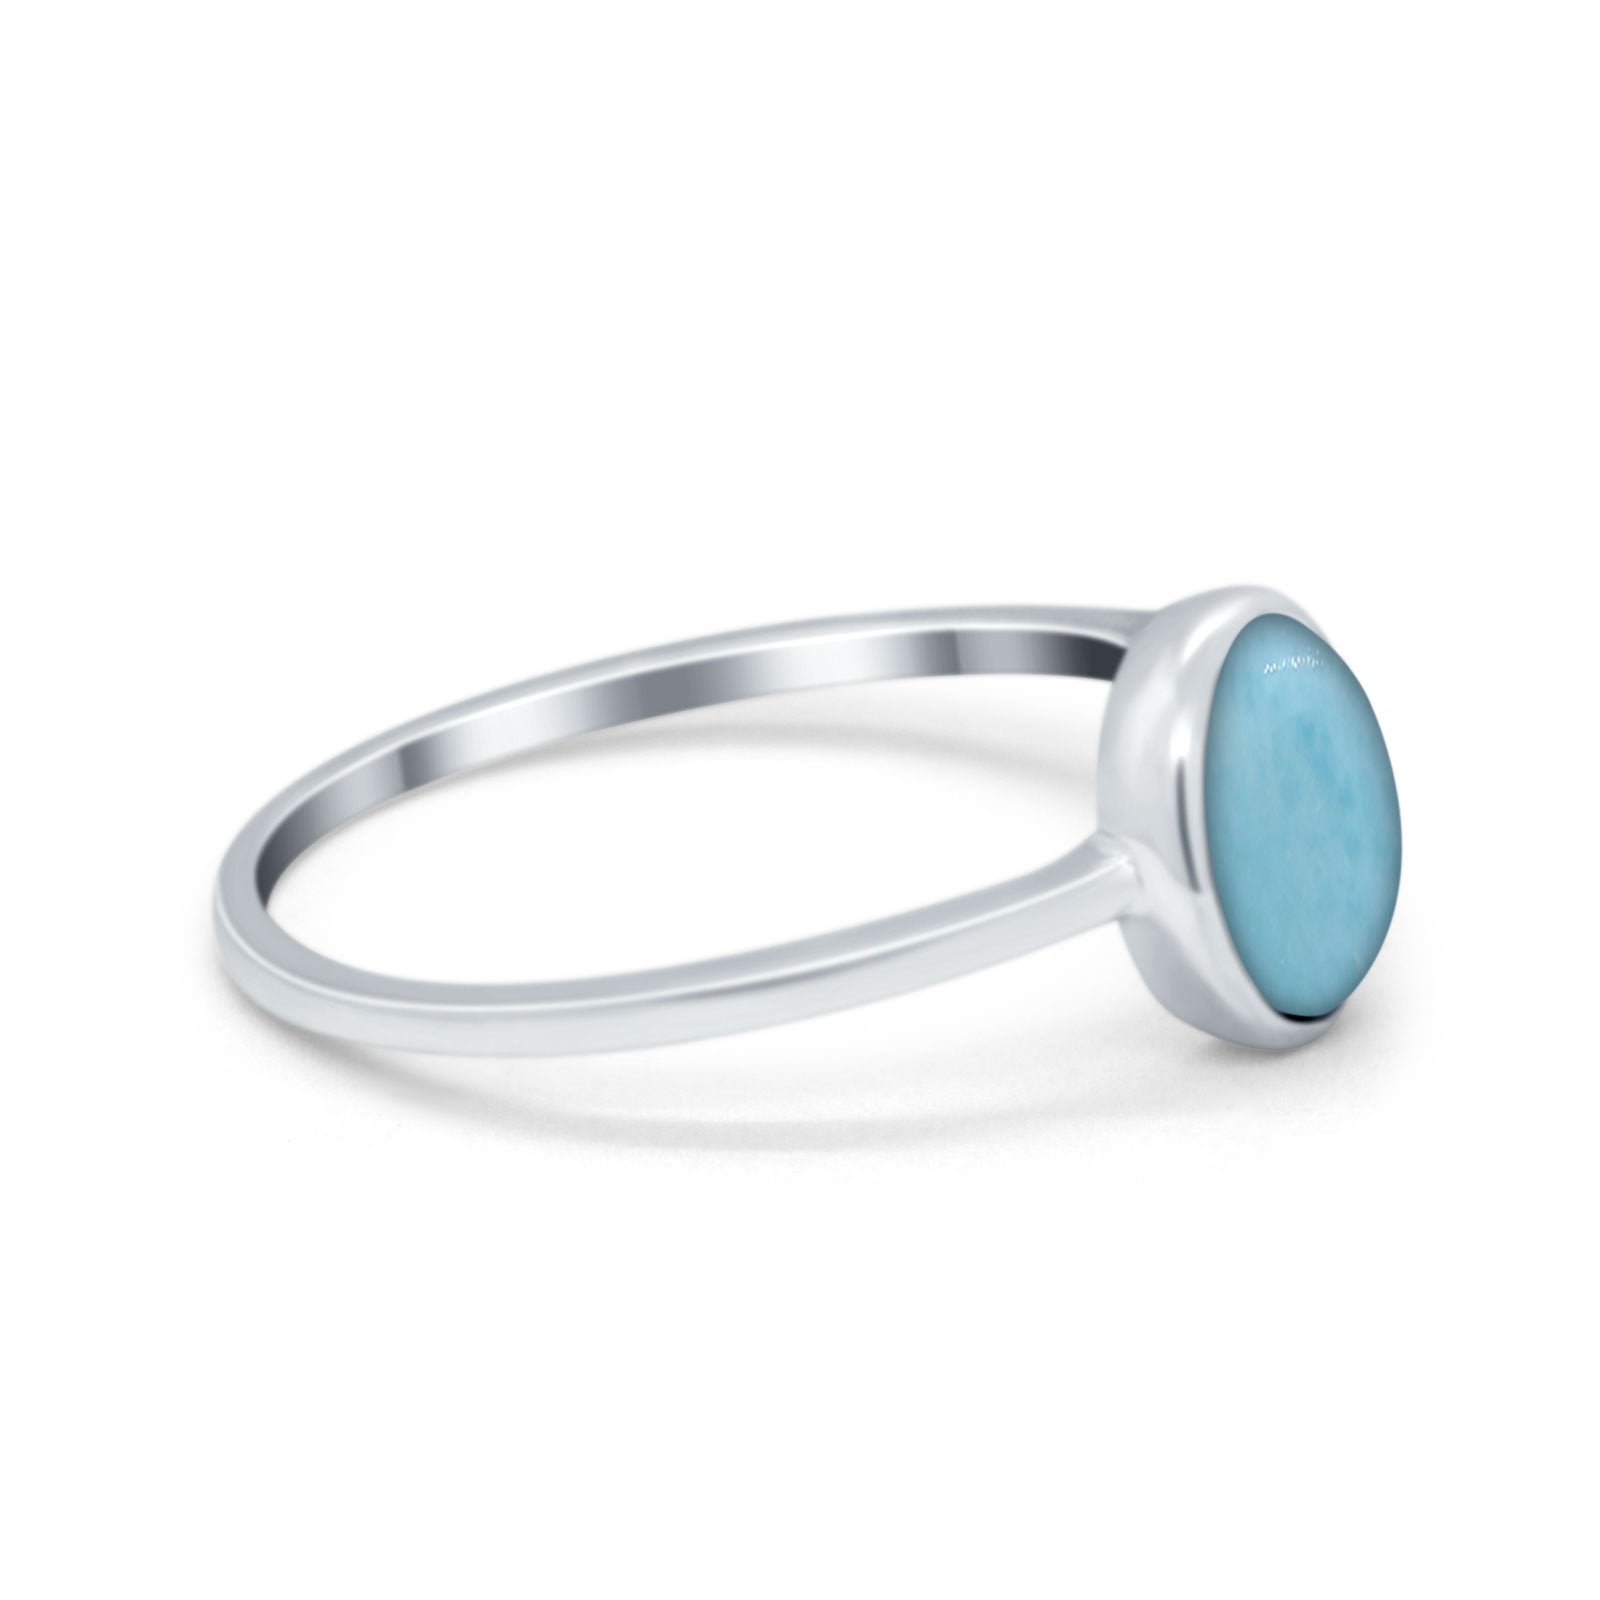 Solitaire Oval Thumb Ring Simulated Larimar CZ Stone 925 Sterling Silver